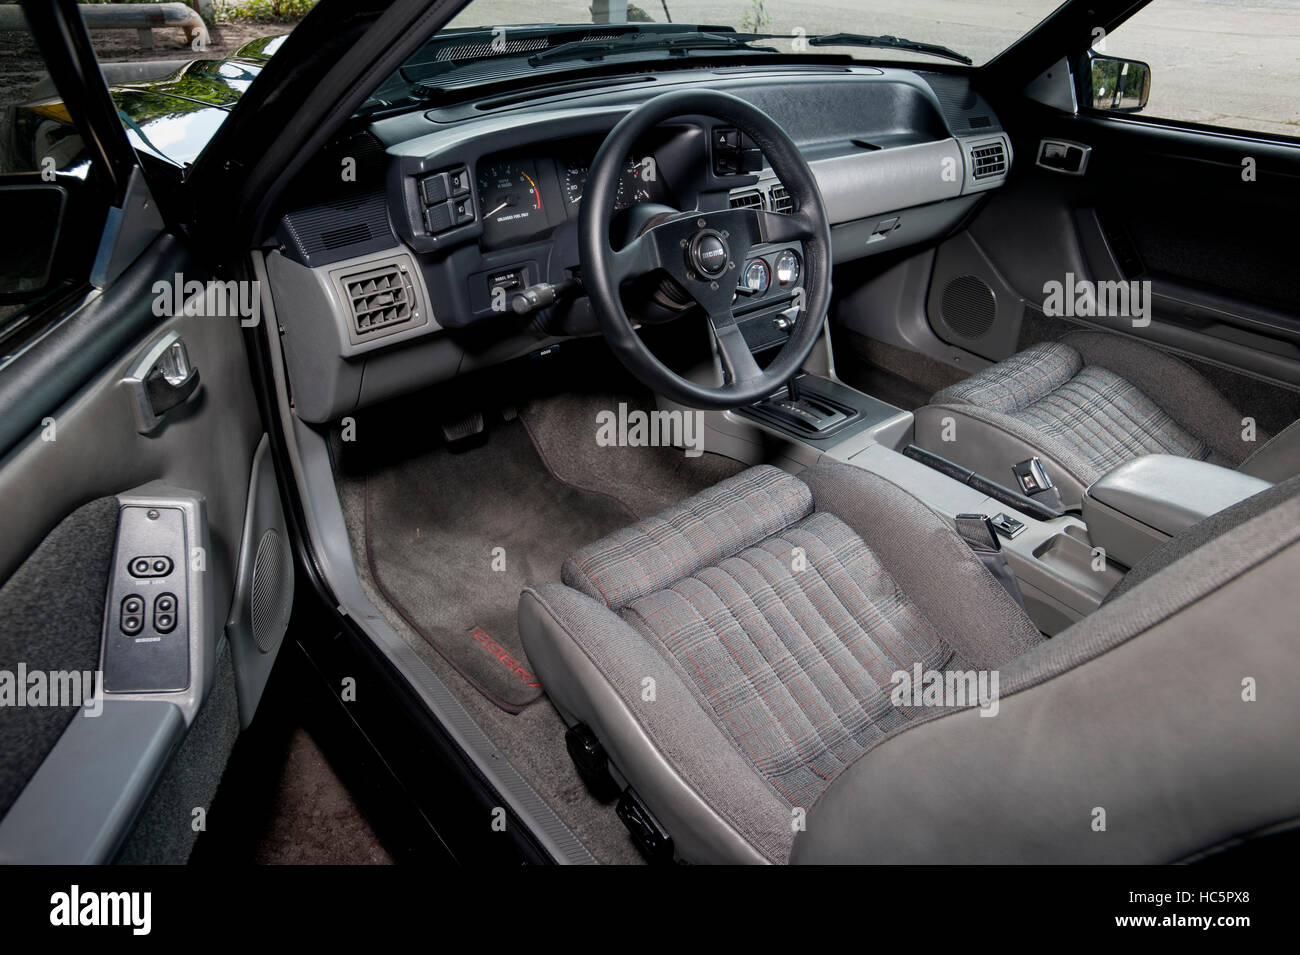 1989 'Fox' body shape Ford Mustang GT interior Stock Photo - Alamy